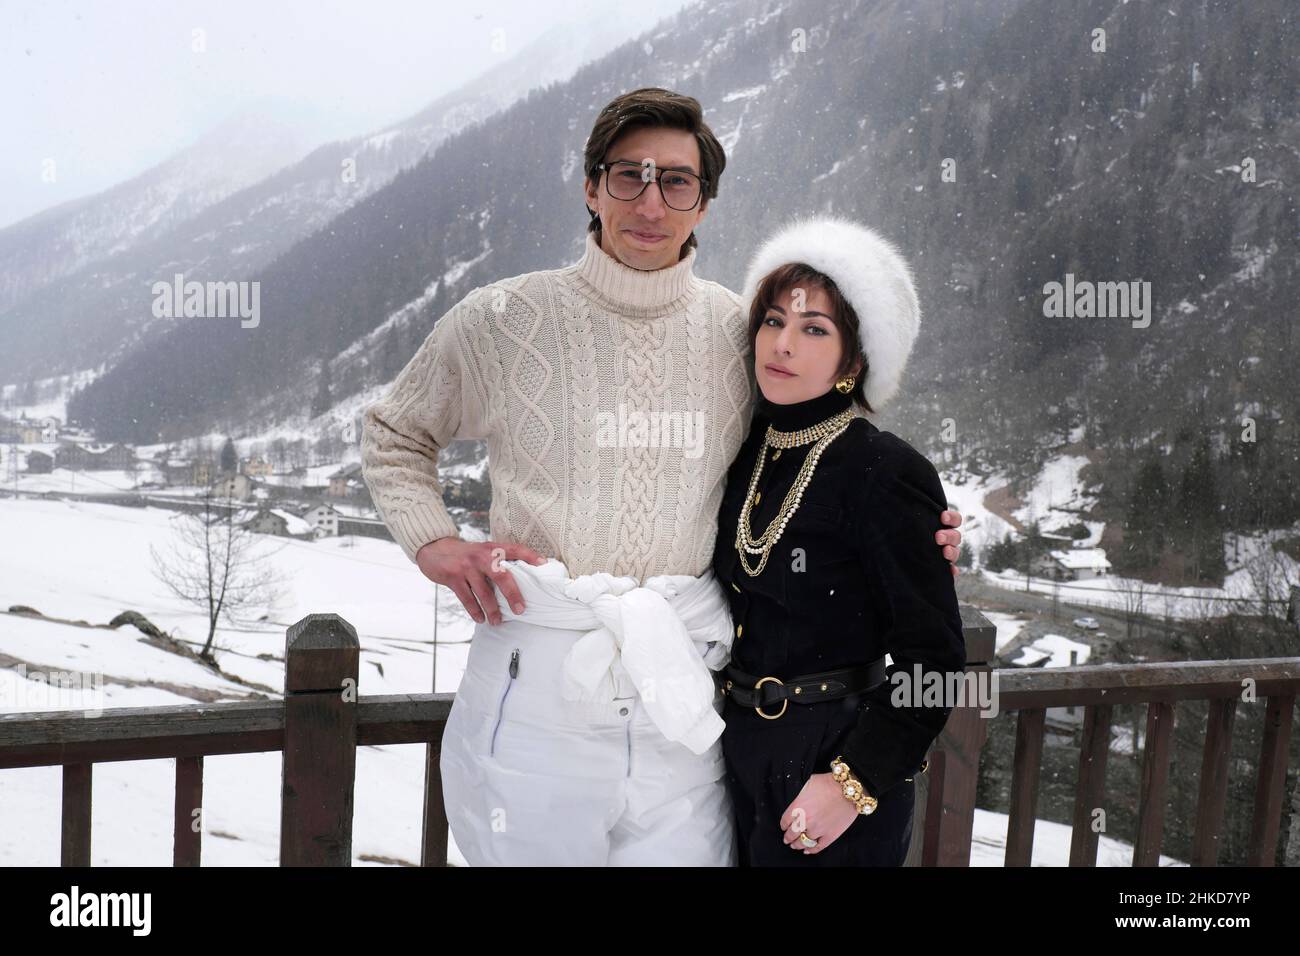 House of Gucci (2021) directed by Ridley Scott and starring Adam Driver as Maurizio Gucci and Lady Gaga as Patrizia Reggian in a crime drama inspired by the family empire behind the famous Italian fashion house. Stock Photo